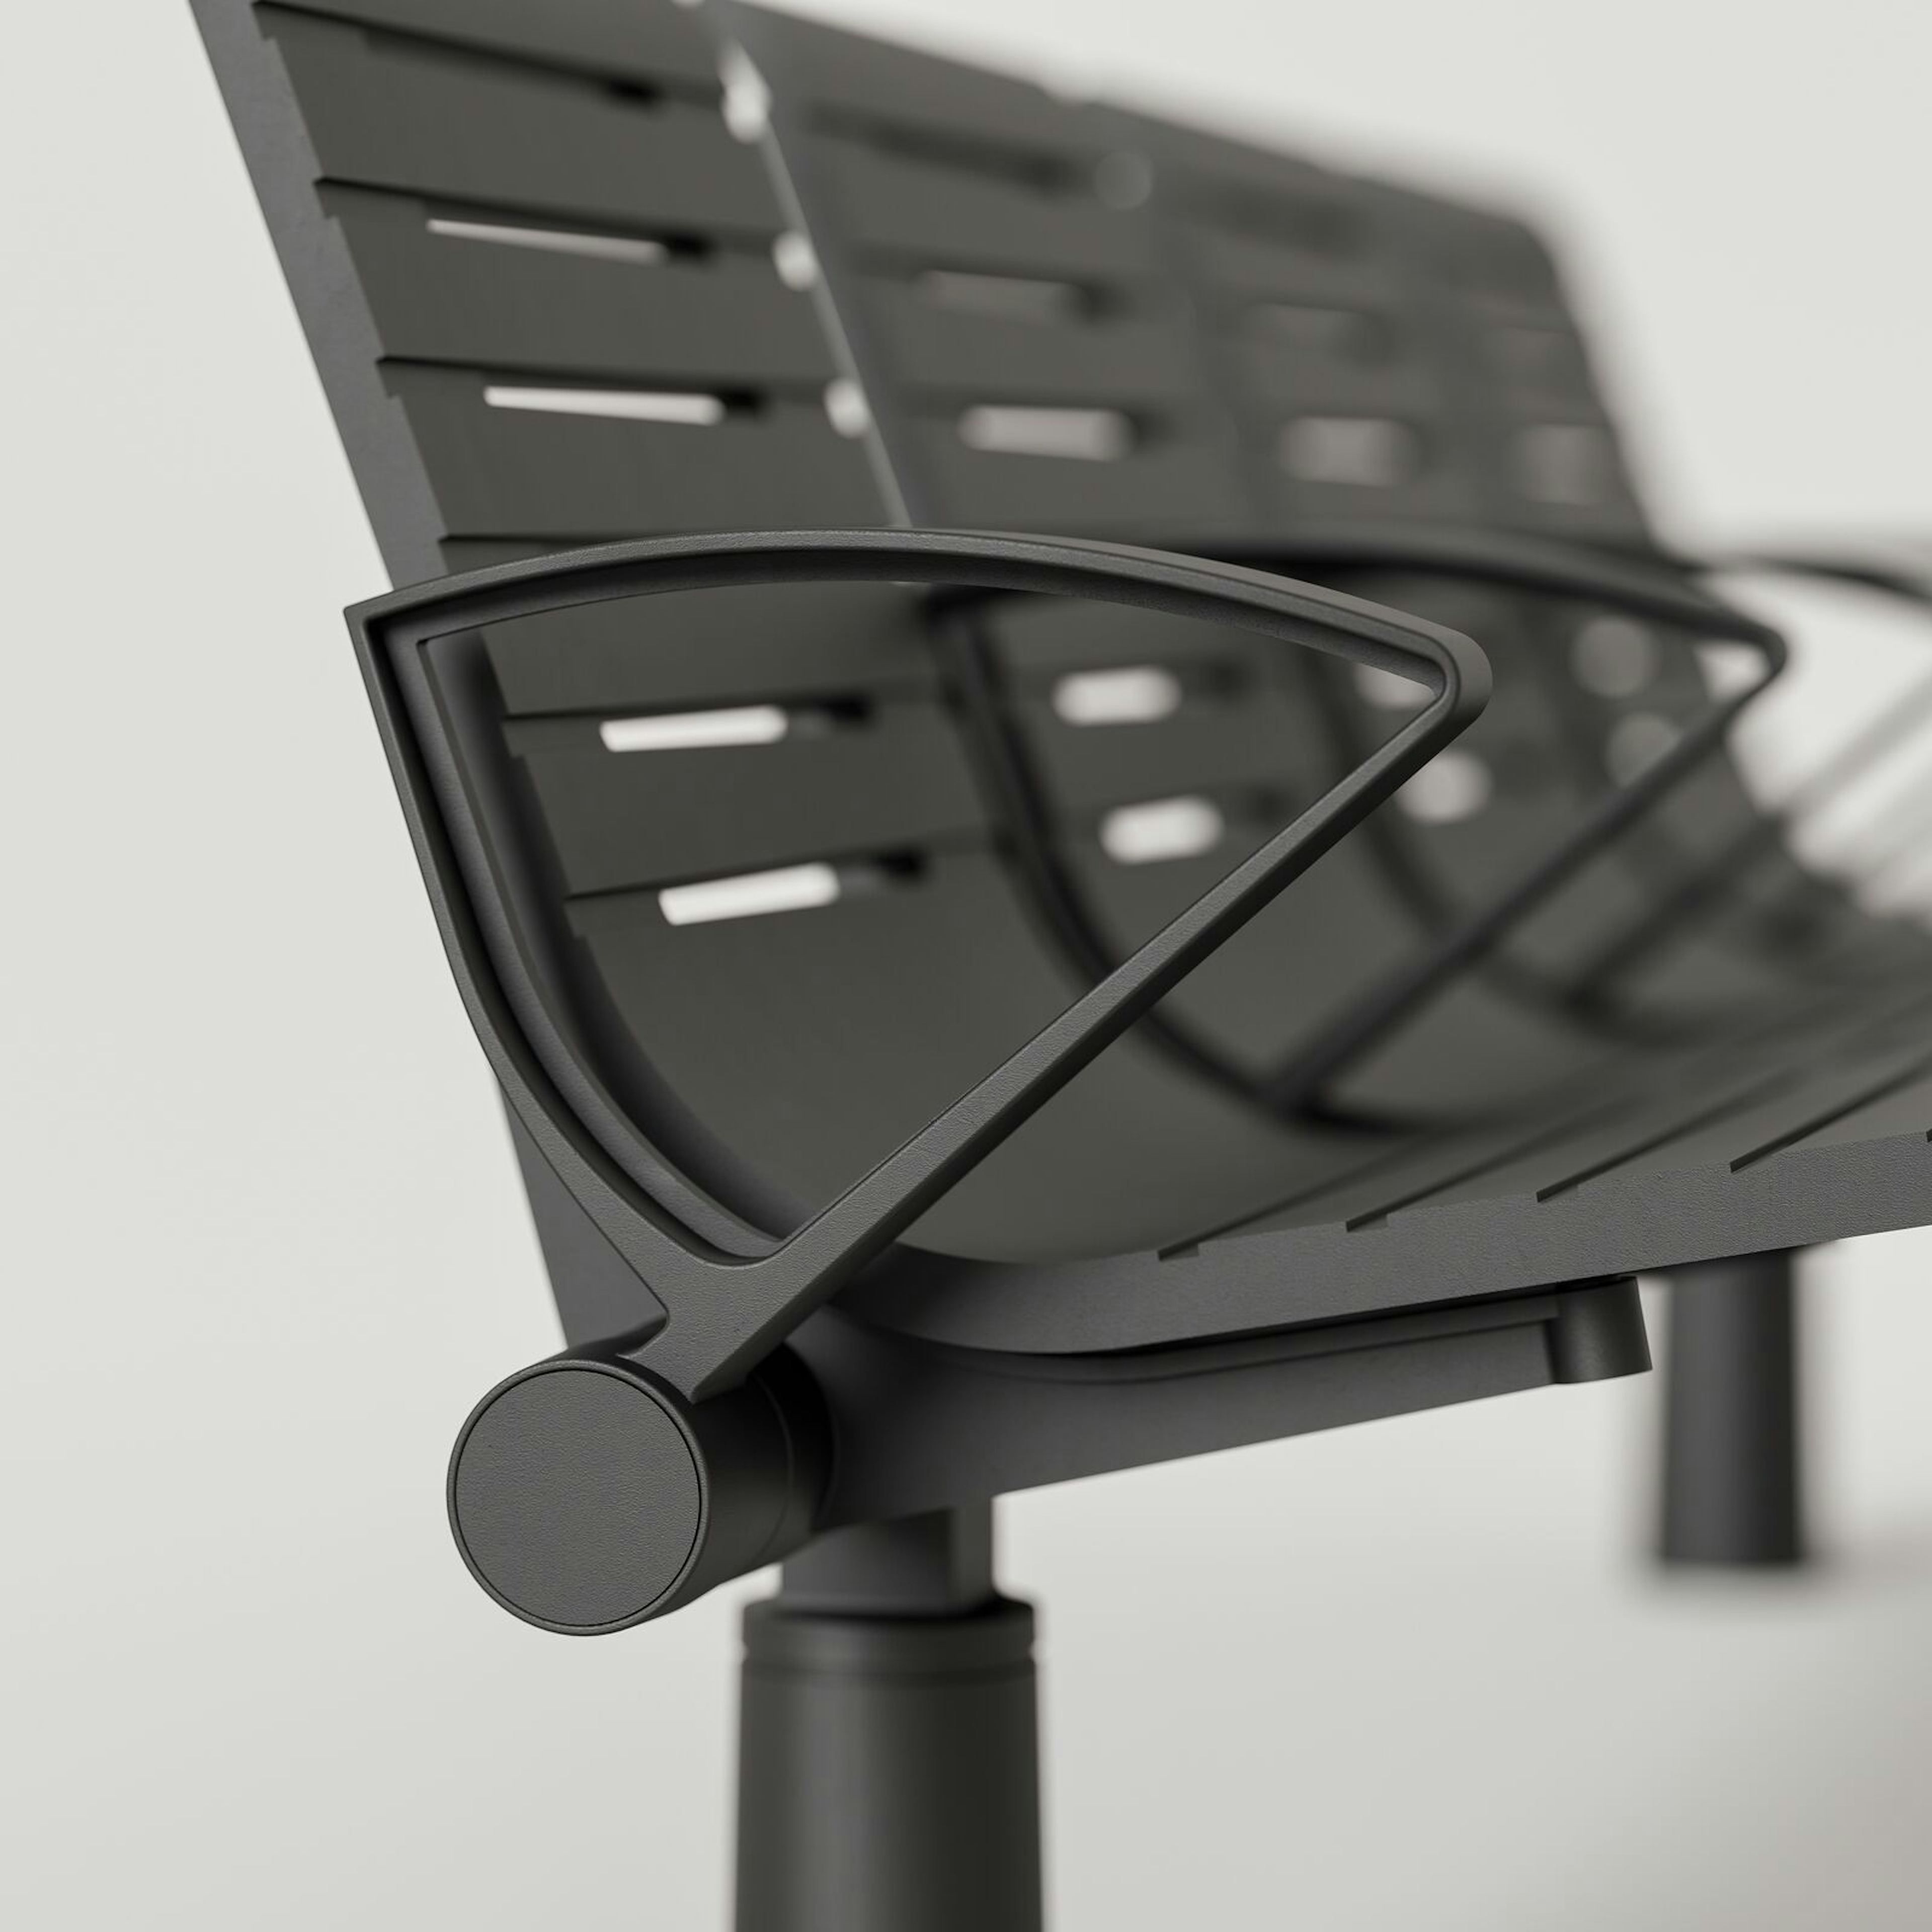 Tecno RS Seating System: Black Texture + Black Texture